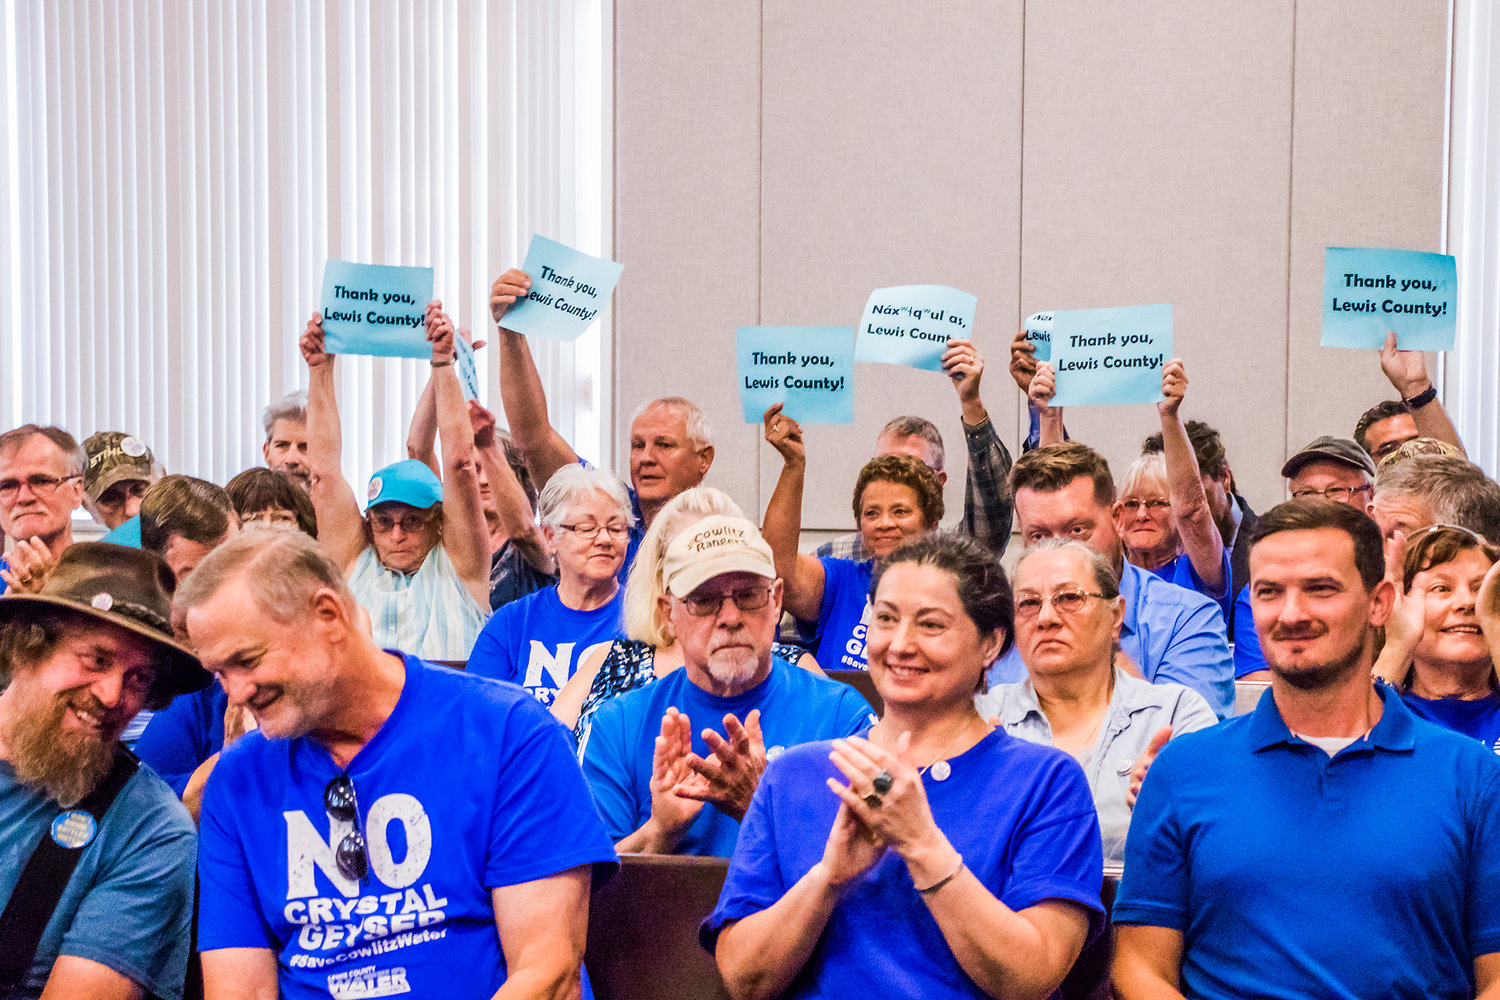 Lewis County Water Alliance members and supporters cheer and hold signs after a decision to issue a moratorium to block Crystal Geyser was made in favor of the group during a public meeting with county commissioners Monday morning at the Lewis County Historical Courthouse in Chehalis.